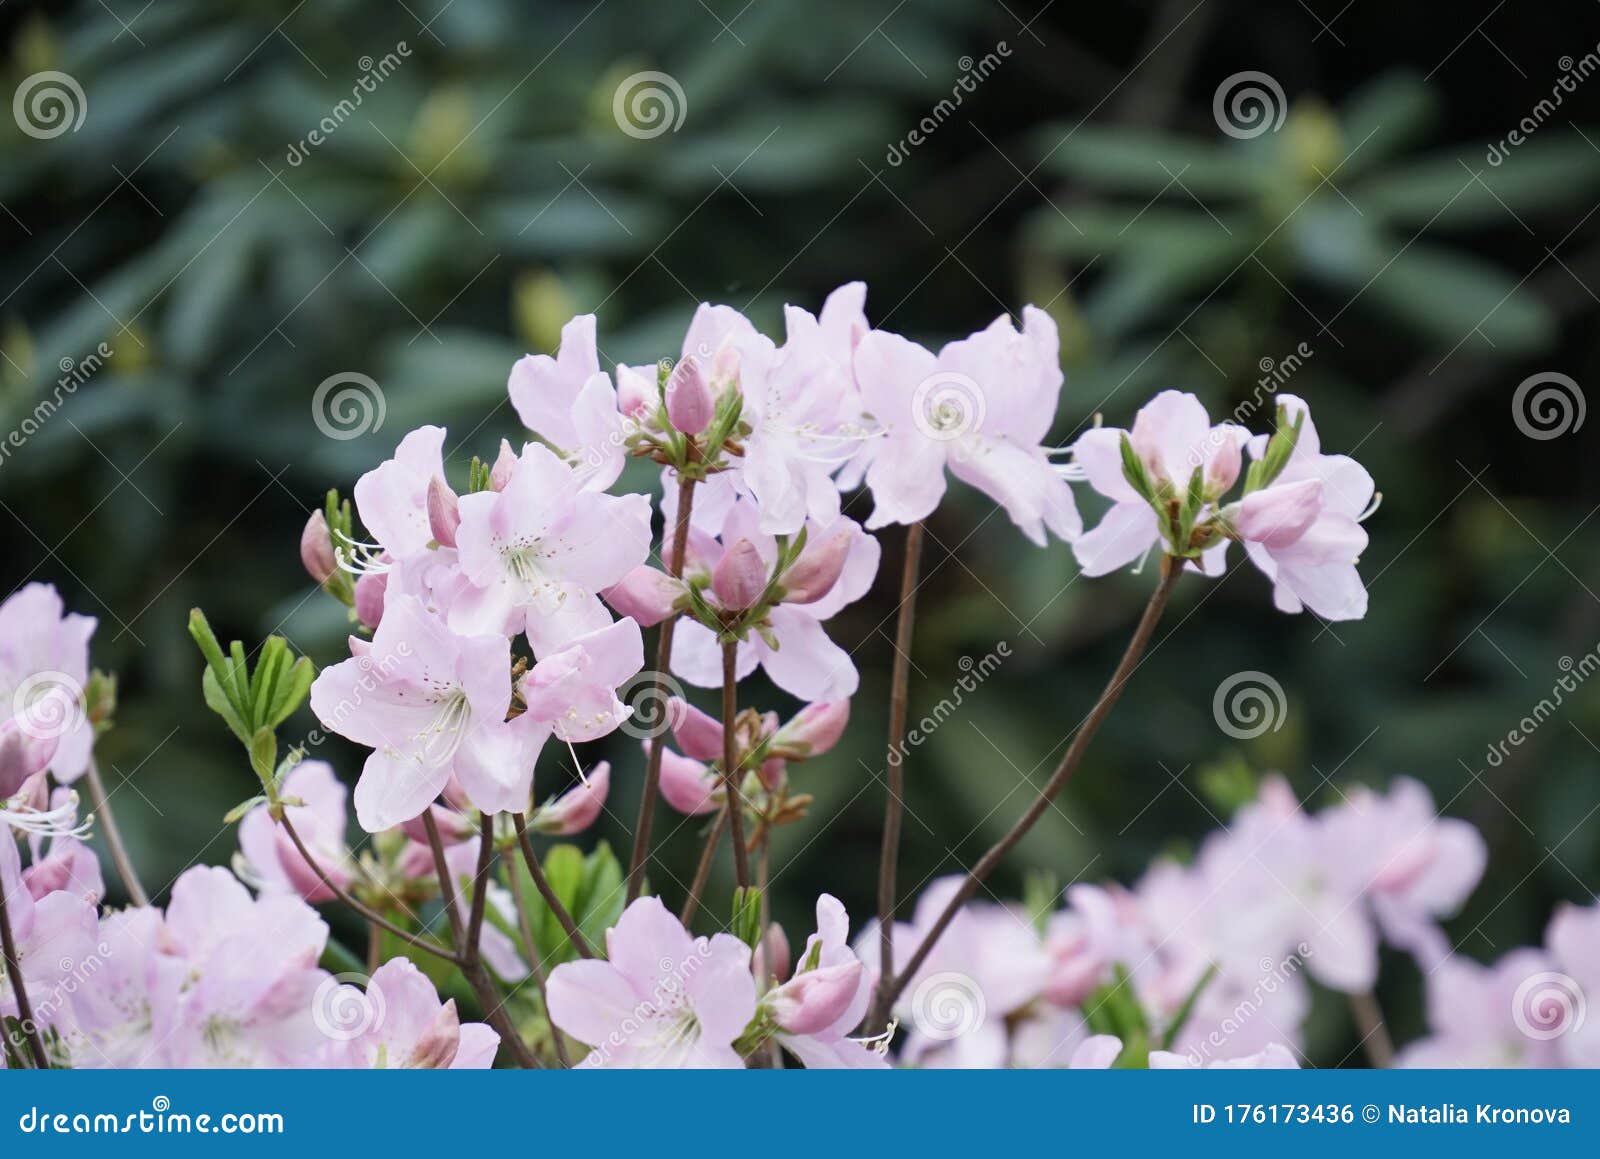 Spring Flowering Of Garden Rhododendron Azalea Pink Delicate Flowers On A Background Of Greenery And Branches Blurry Backgroun Stock Photo Image Of Fabric Abstract 176173436